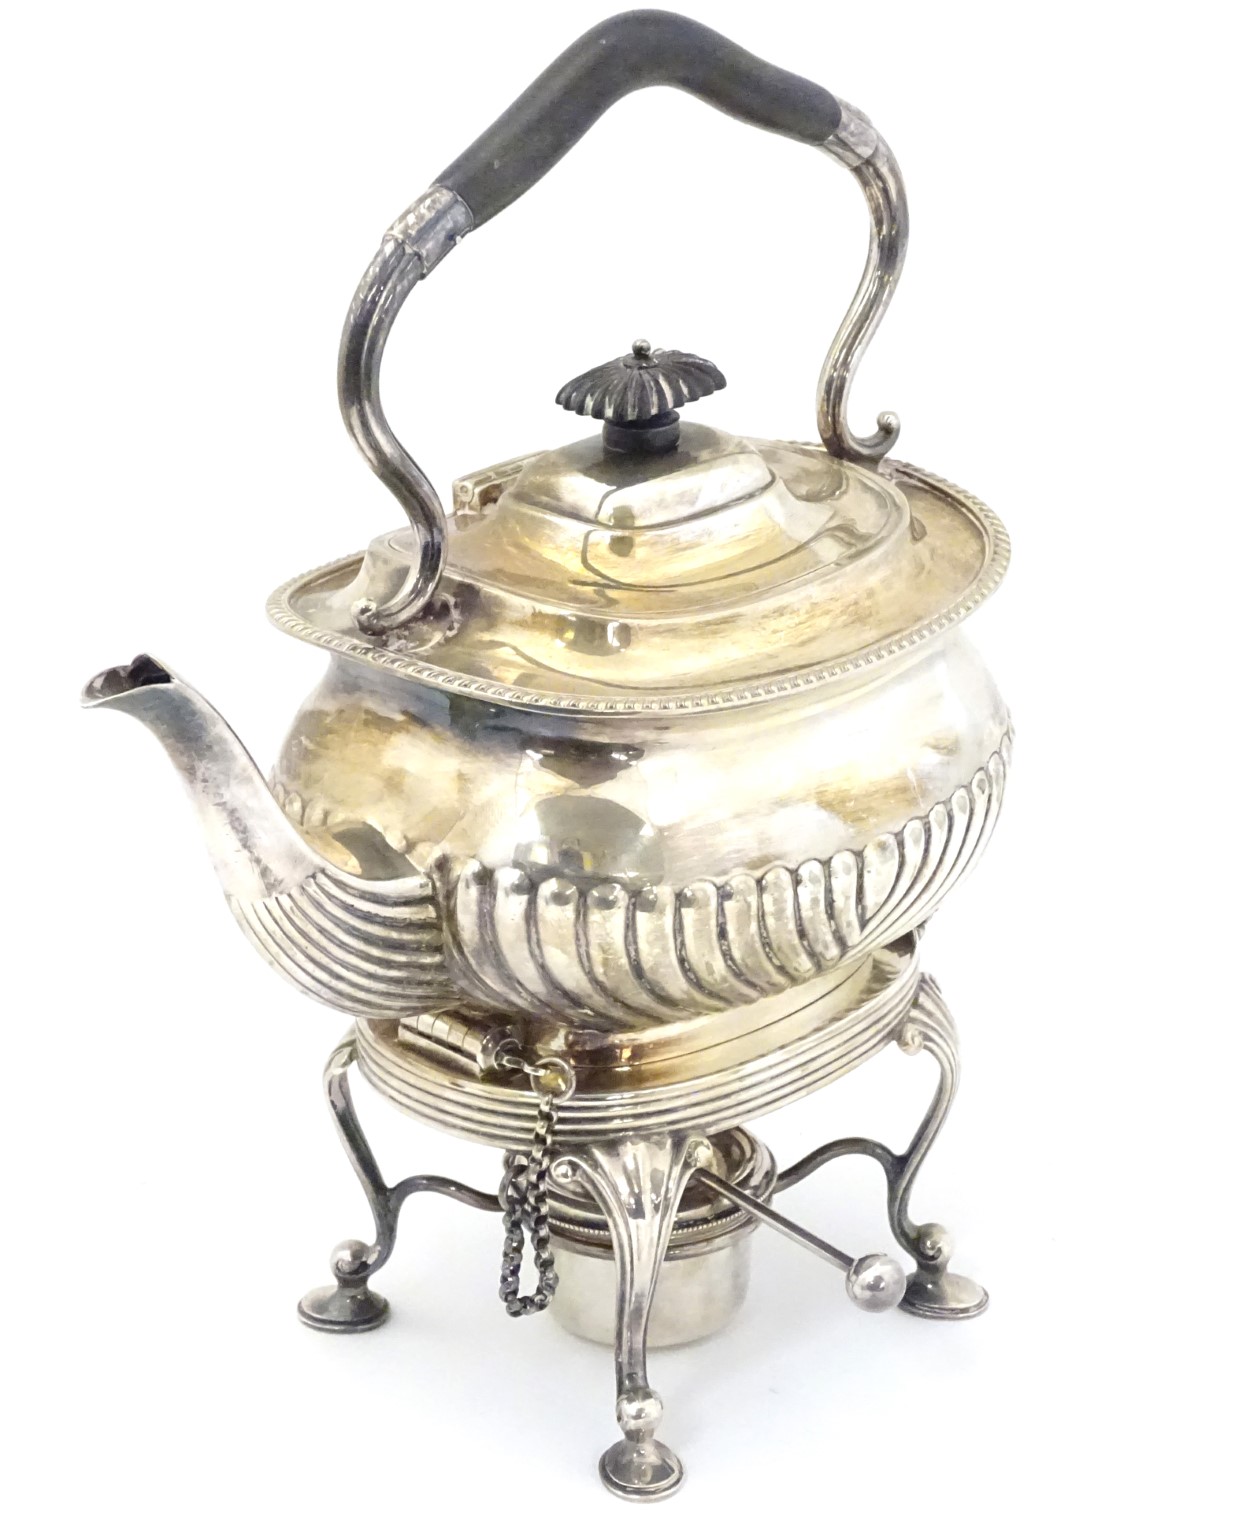 A late 19thC / early 20thC silver plate spirit kettle on stand with burner under the whole 12" high - Image 5 of 7